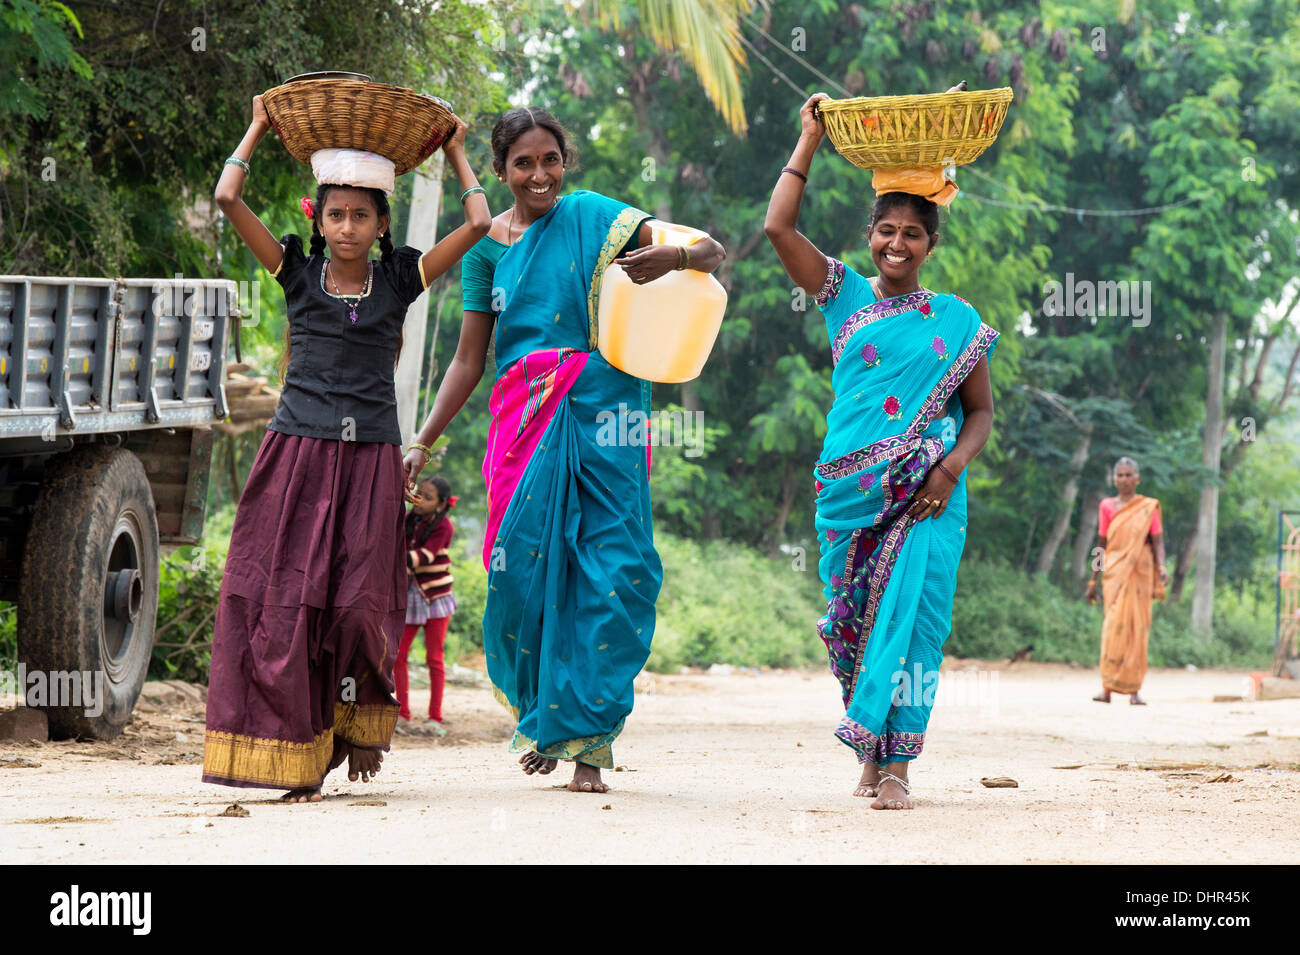 Happy smiling Indian women and girl carrying a water jug and baskets in a rural Indian village street. Andhra Pradesh, India Stock Photo